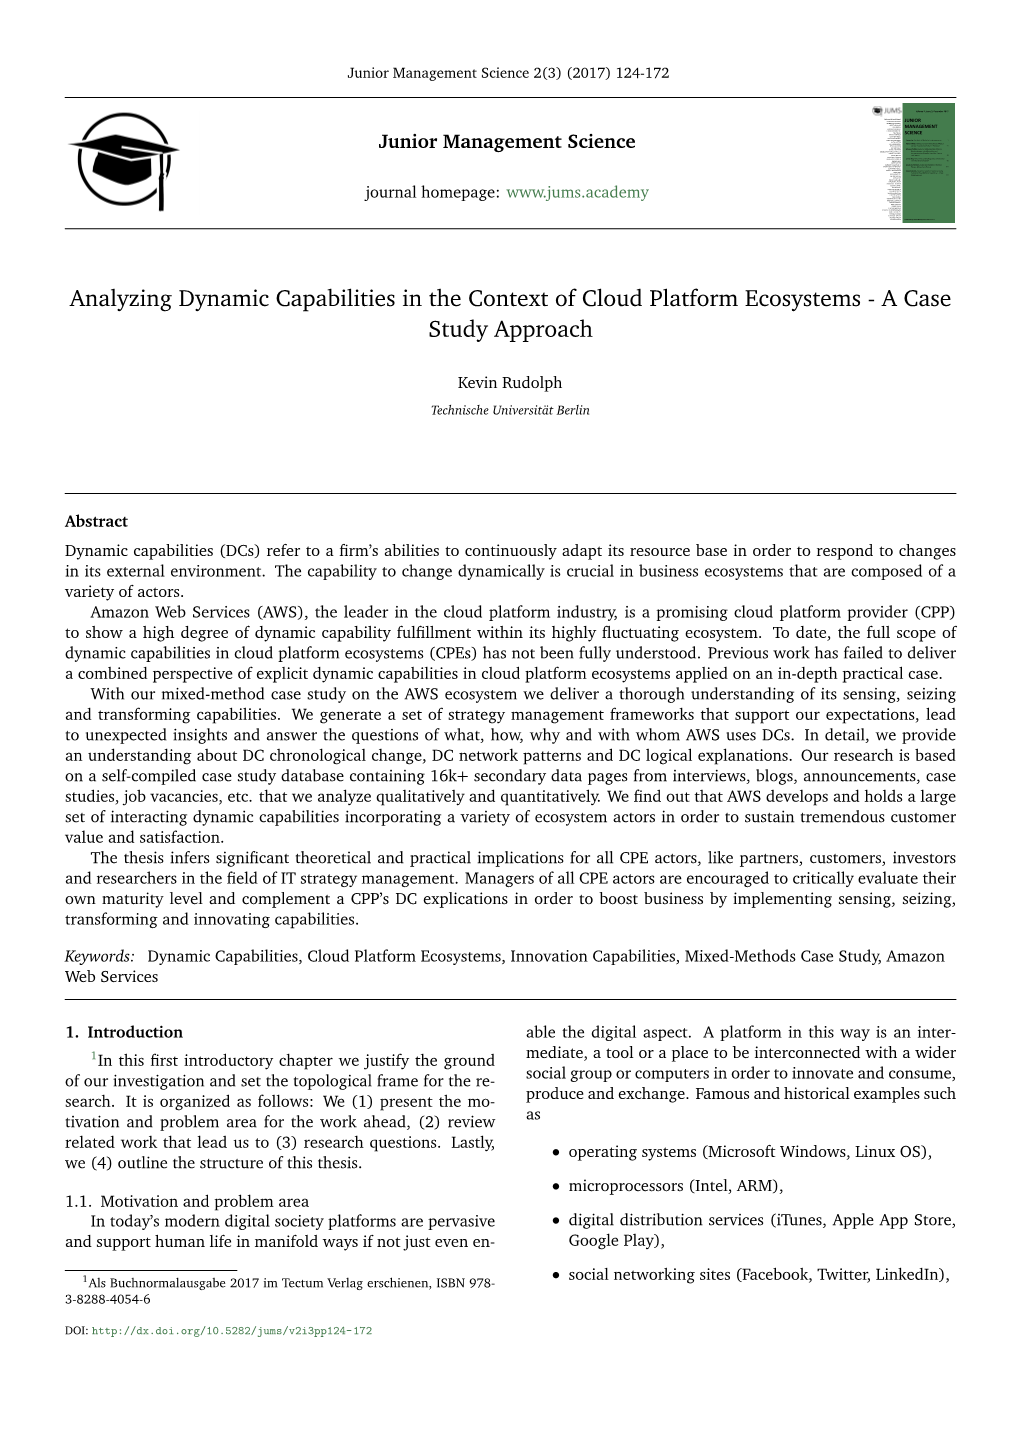 Analyzing Dynamic Capabilities in the Context of Cloud Platform Ecosystems - a Case Study Approach